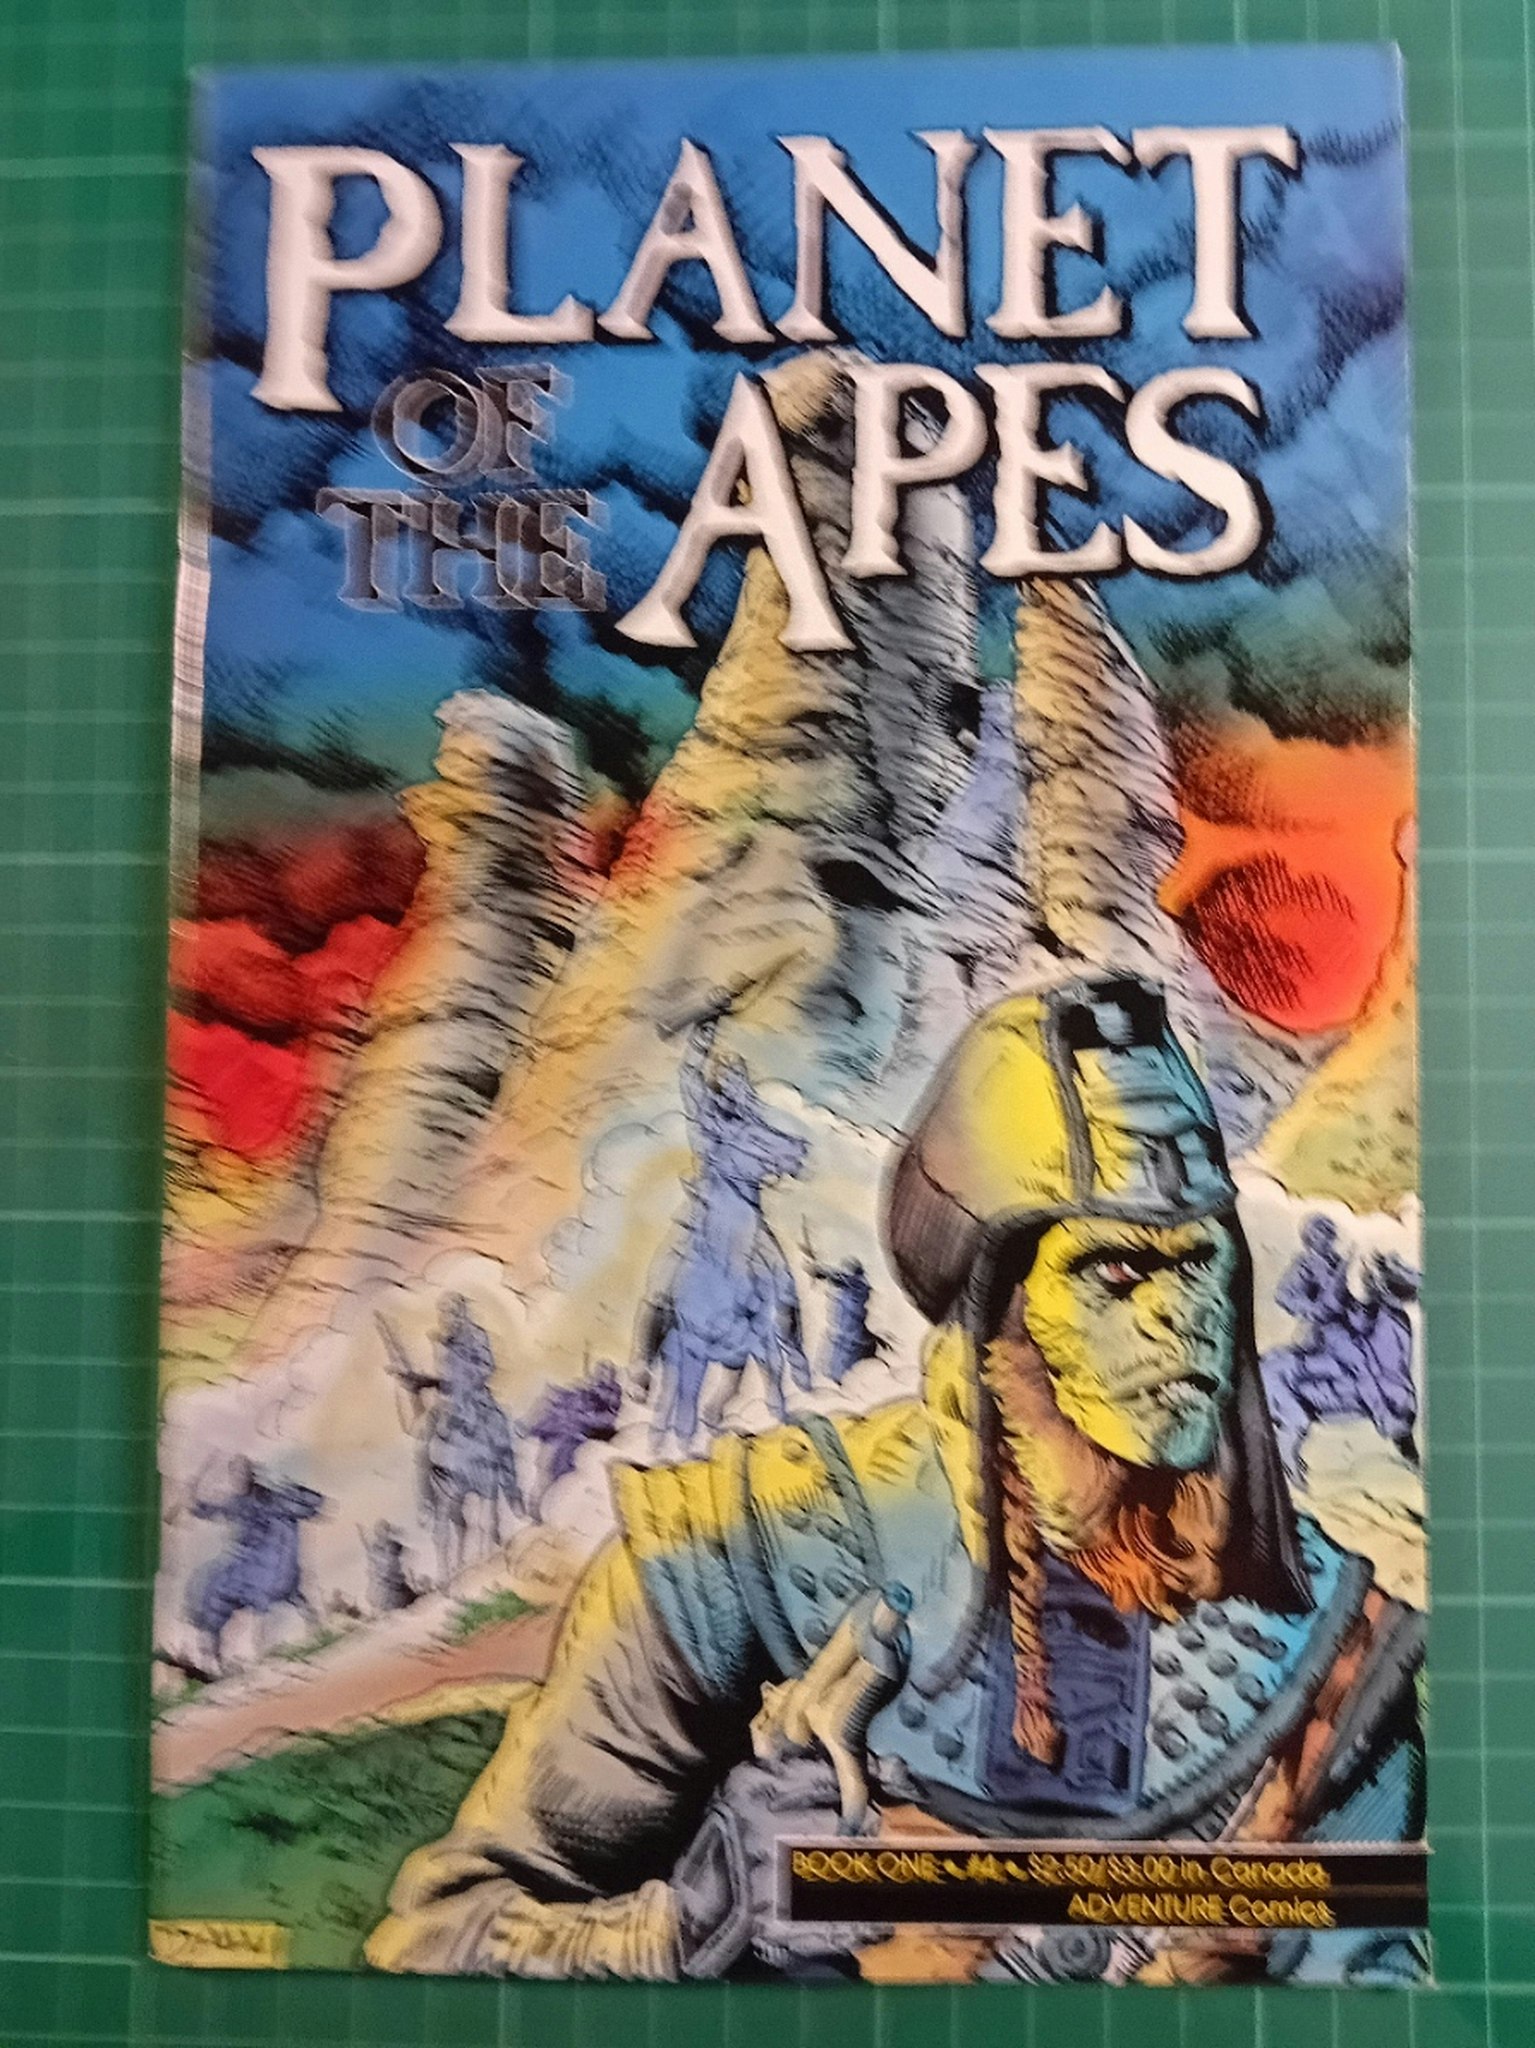 Planet of the apes #04